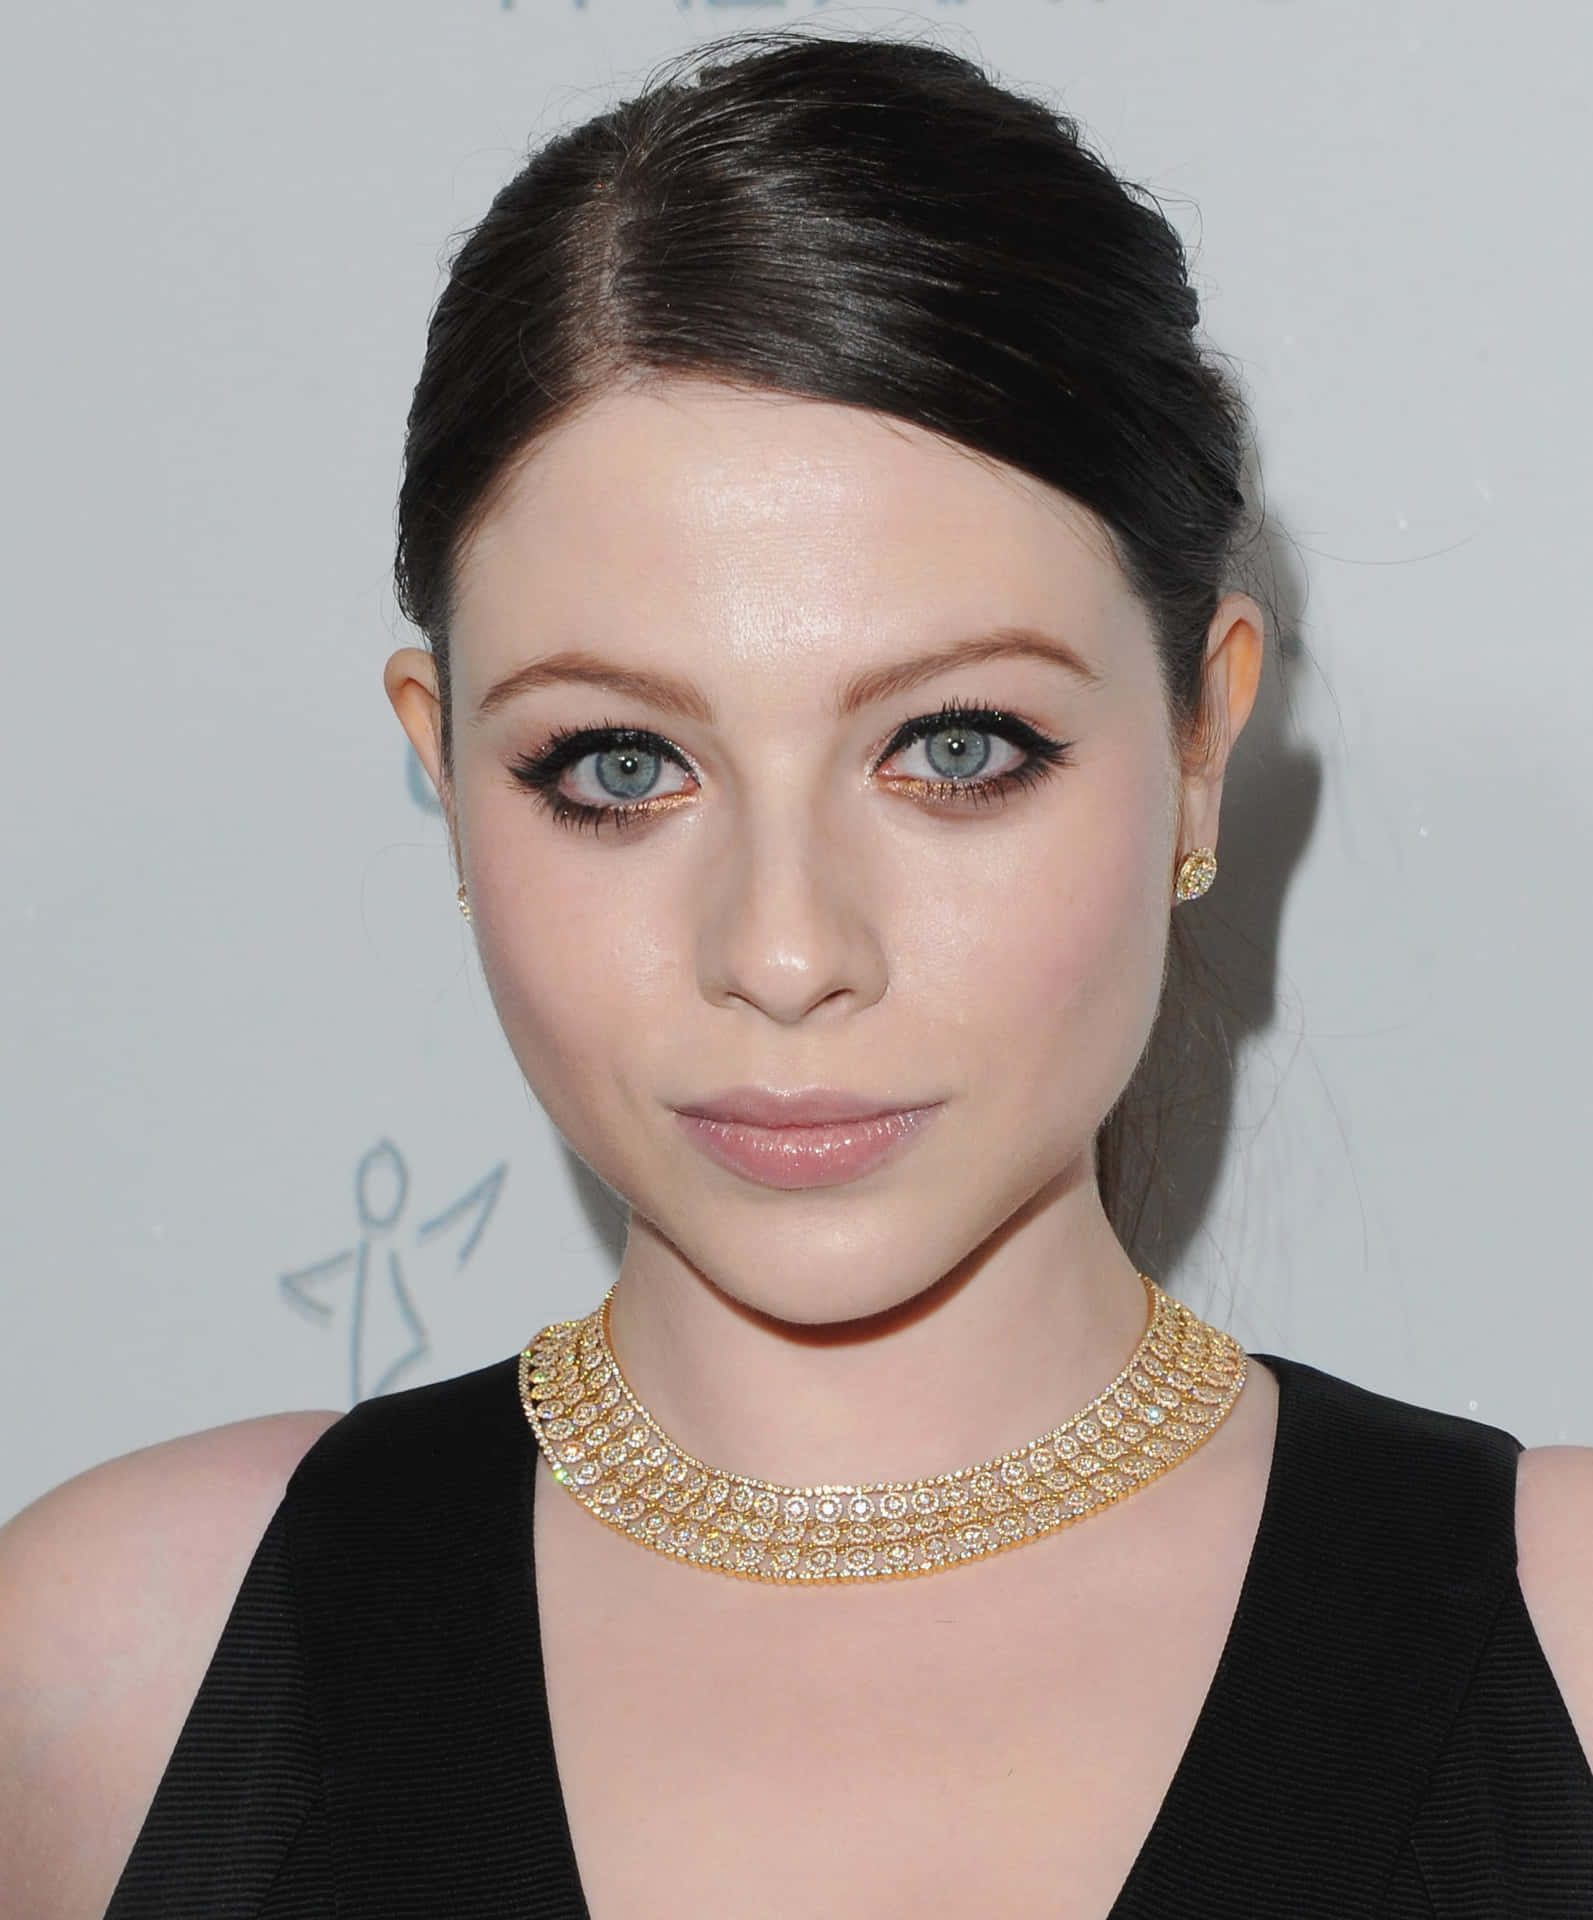 Michelle Trachtenberg striking a pose in a stylish outfit Wallpaper